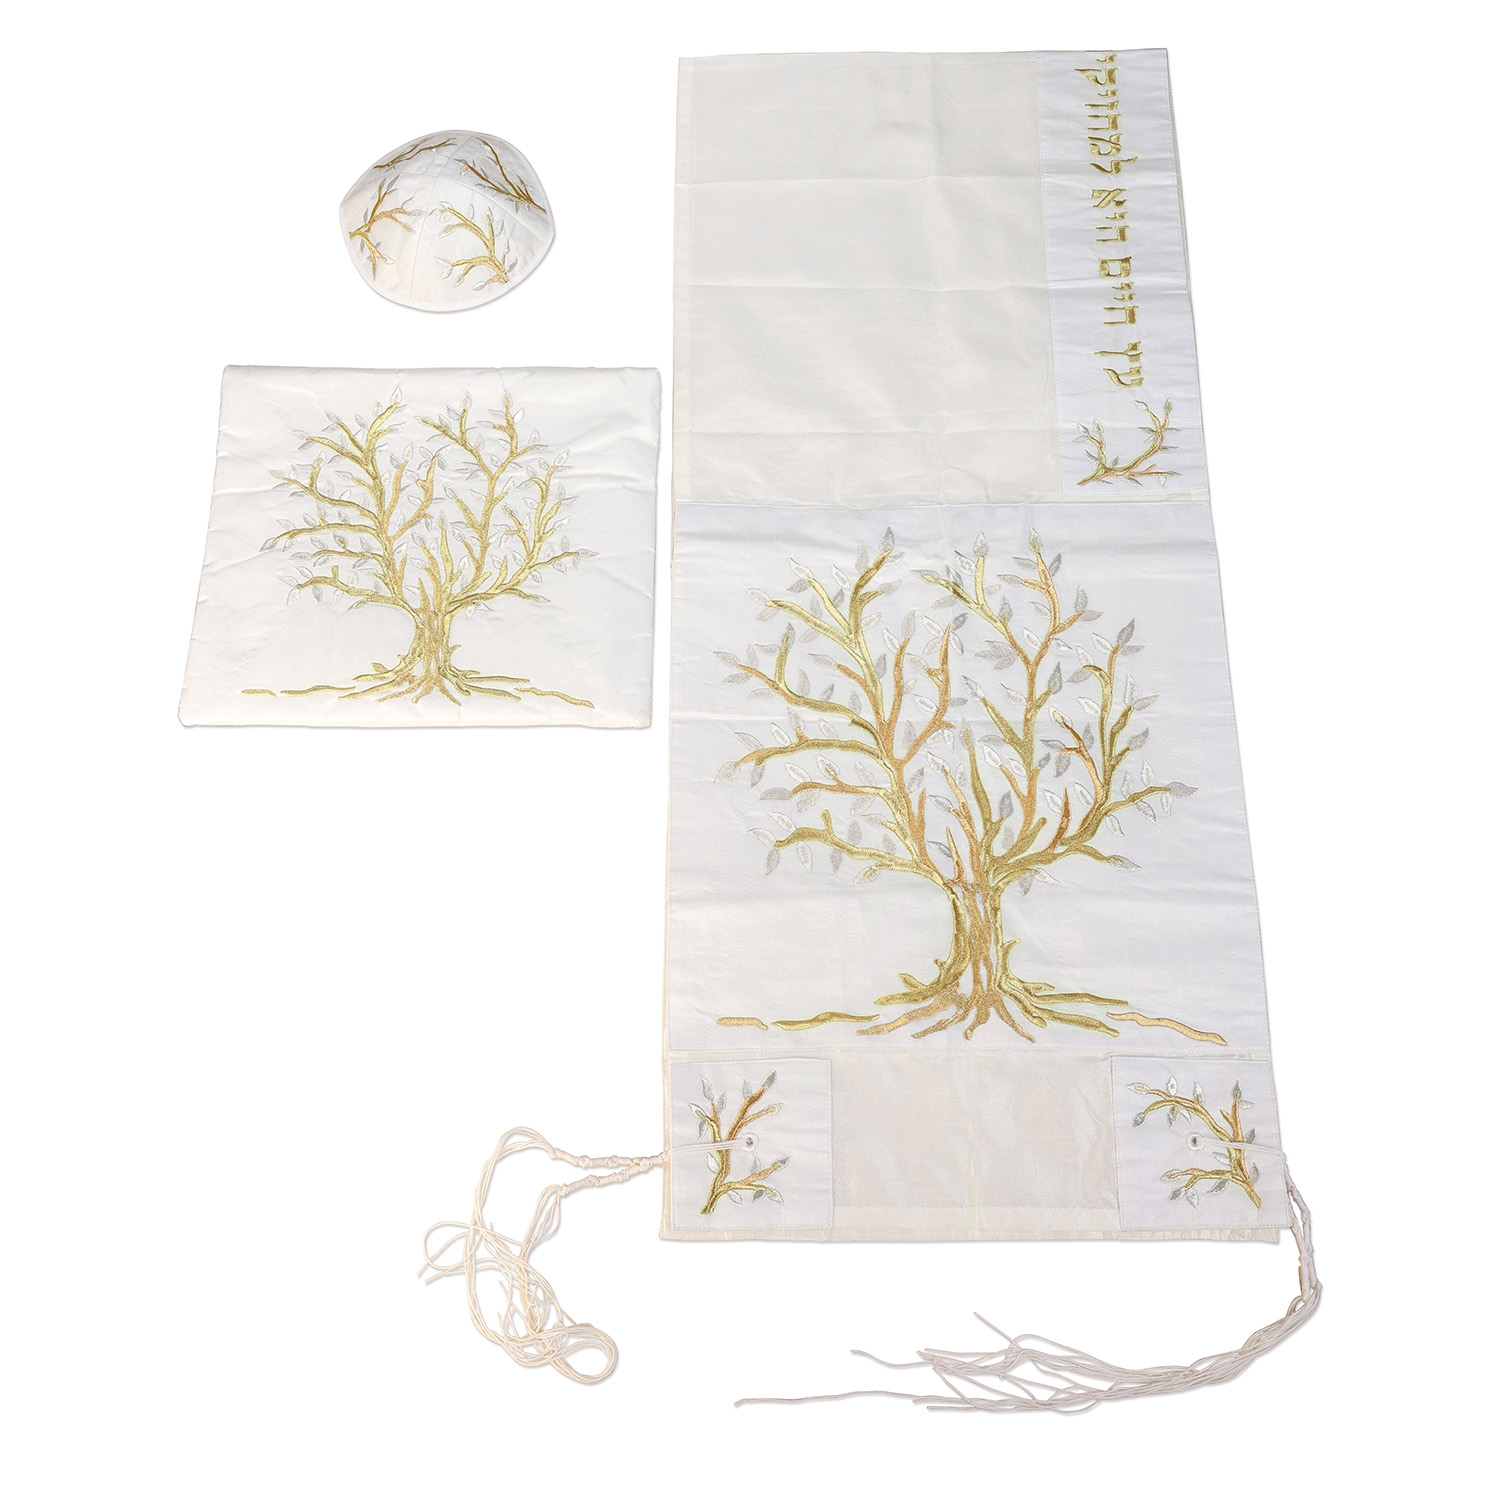 Yair Emanuel Embroidered Poly Silk Tallit Prayer Shawl Set with Tree of Life Design (Gold) - 1